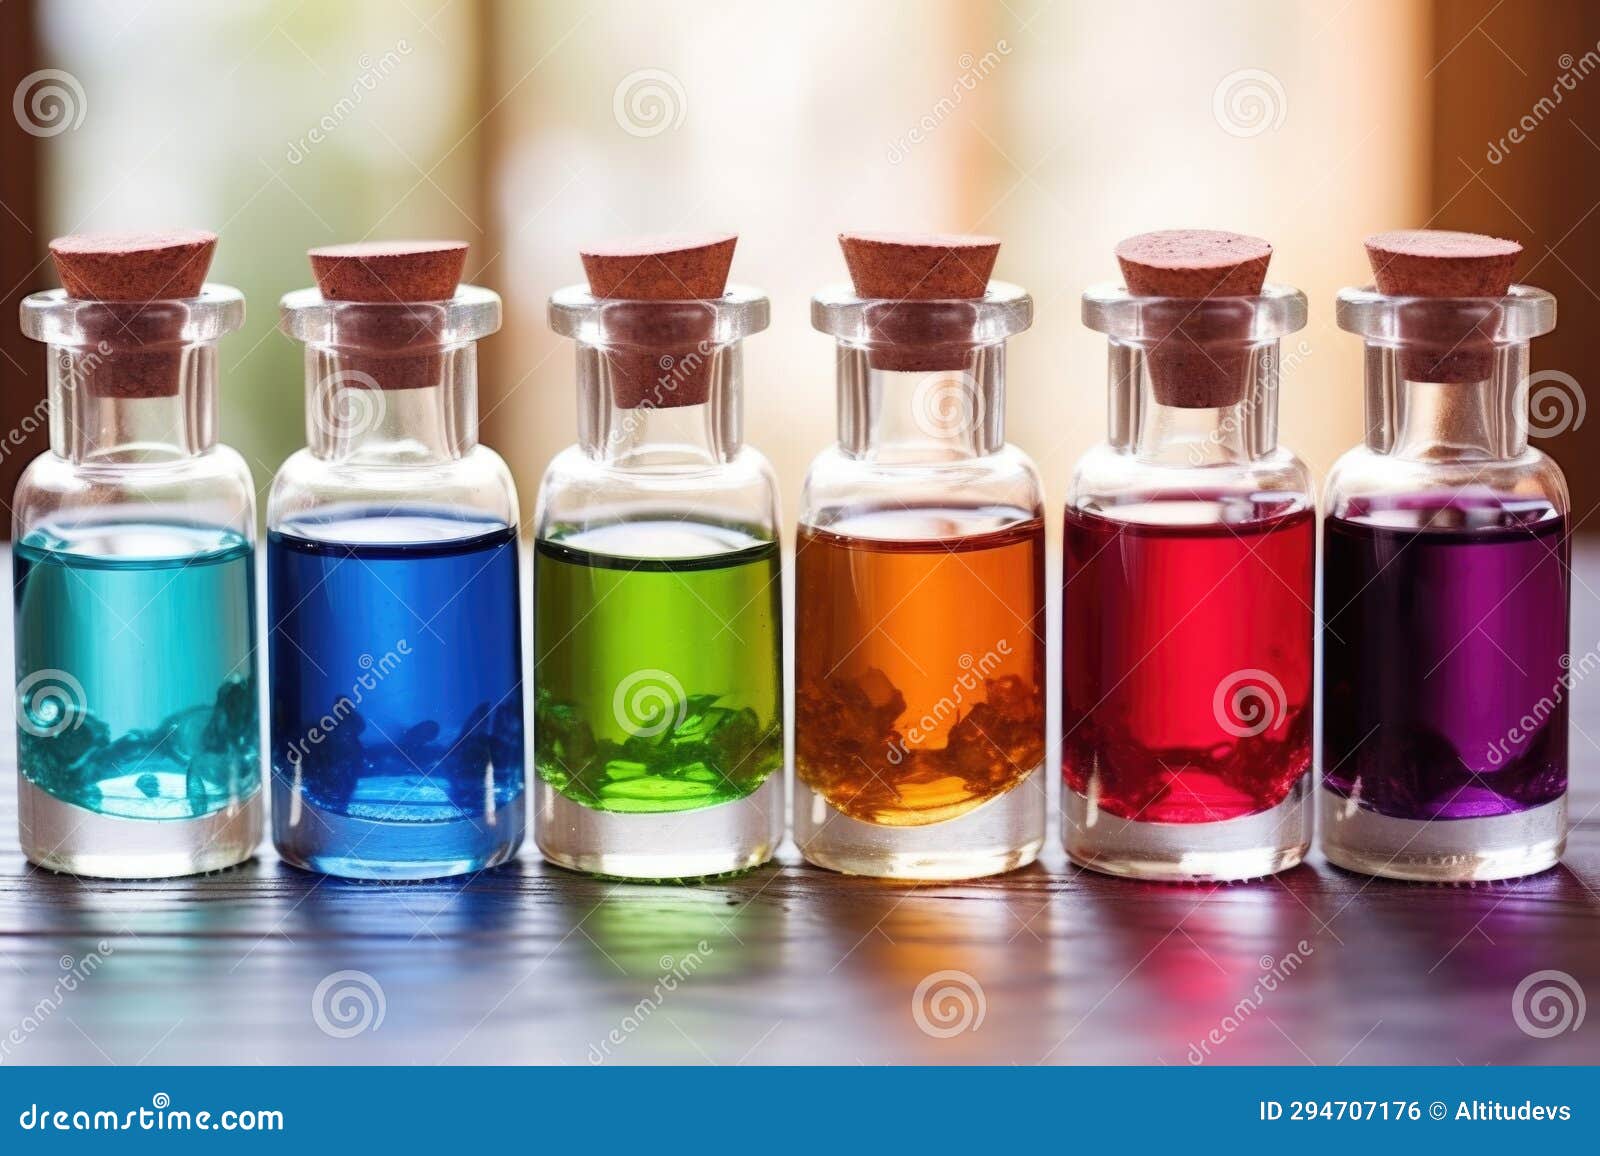 glass bottles filled with different-colored synthesized aromas